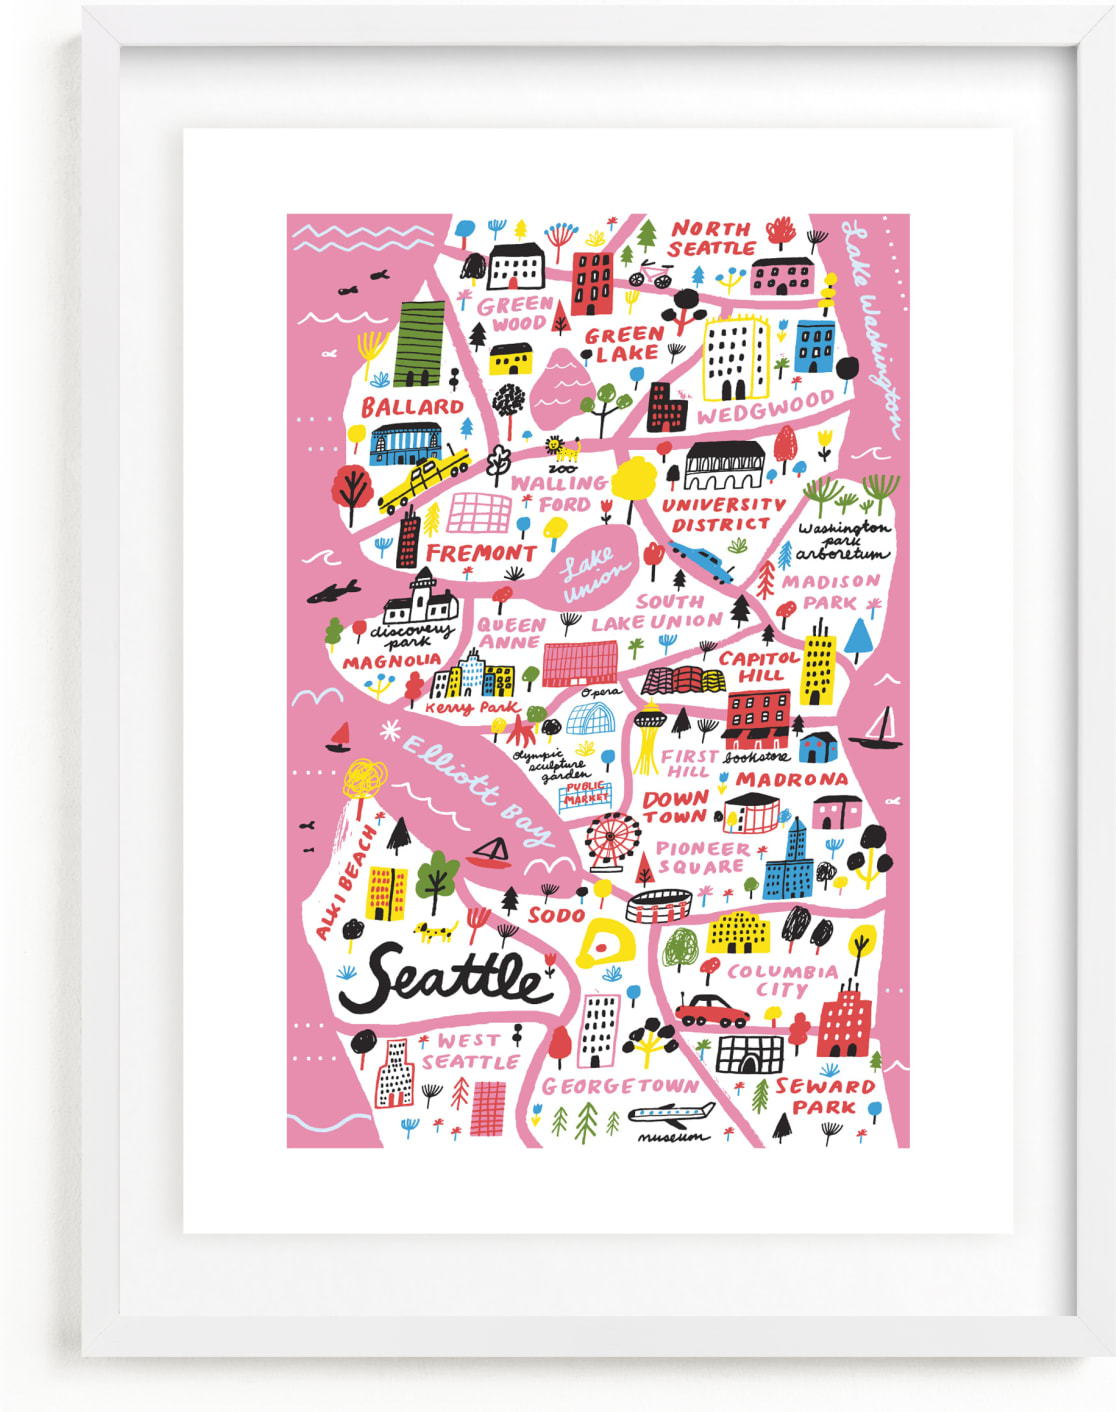 This is a colorful, white, pink art by Jordan Sondler called I Love Seattle.